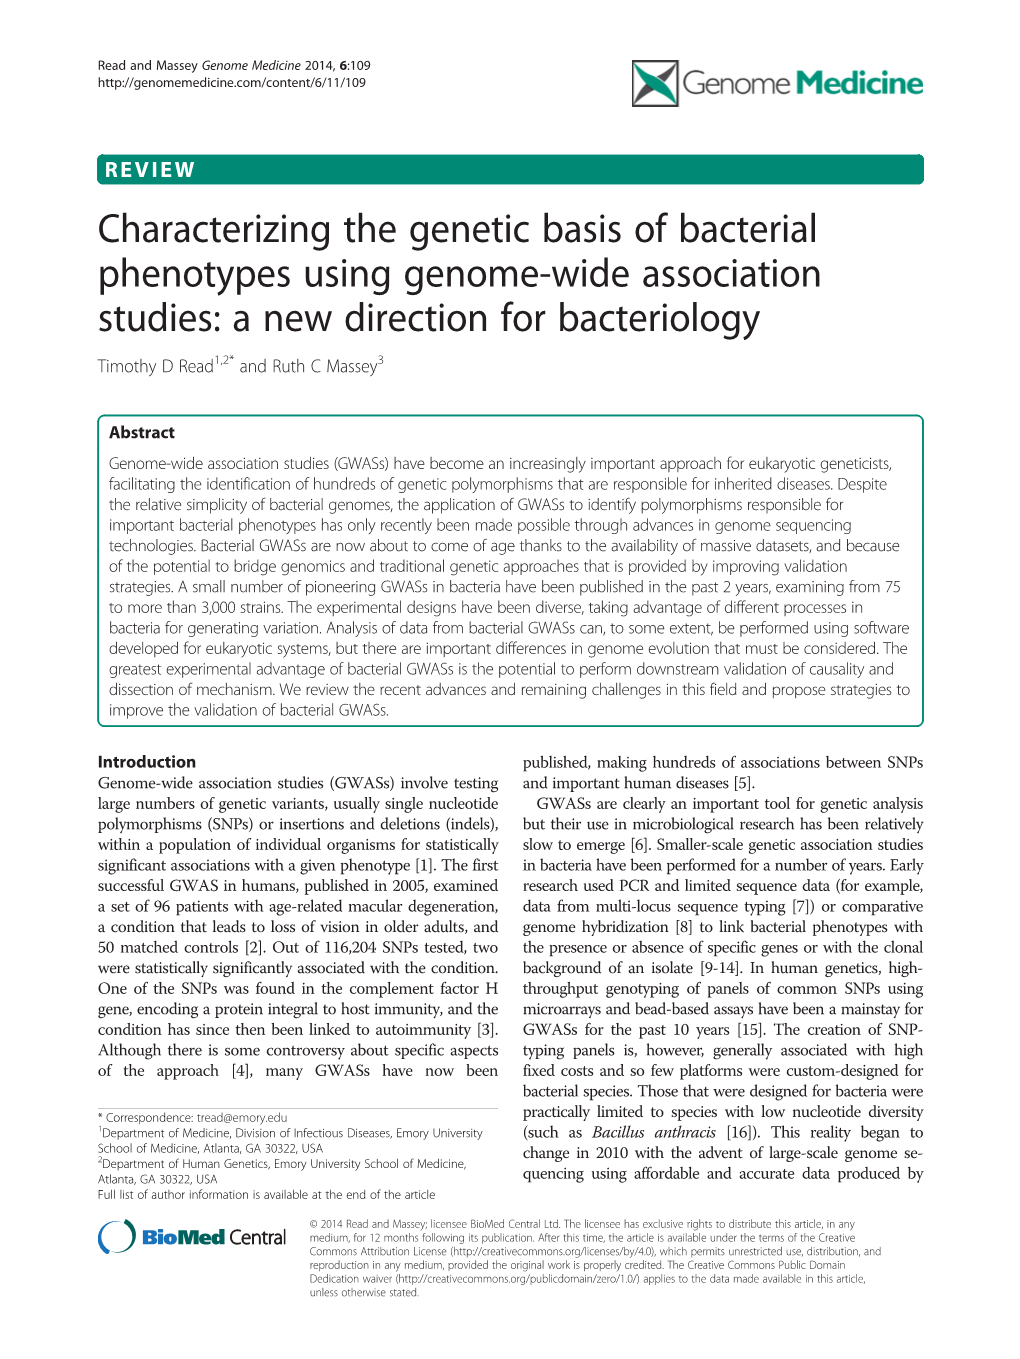 Characterizing the Genetic Basis of Bacterial Phenotypes Using Genome-Wide Association Studies: a New Direction for Bacteriology Timothy D Read1,2* and Ruth C Massey3